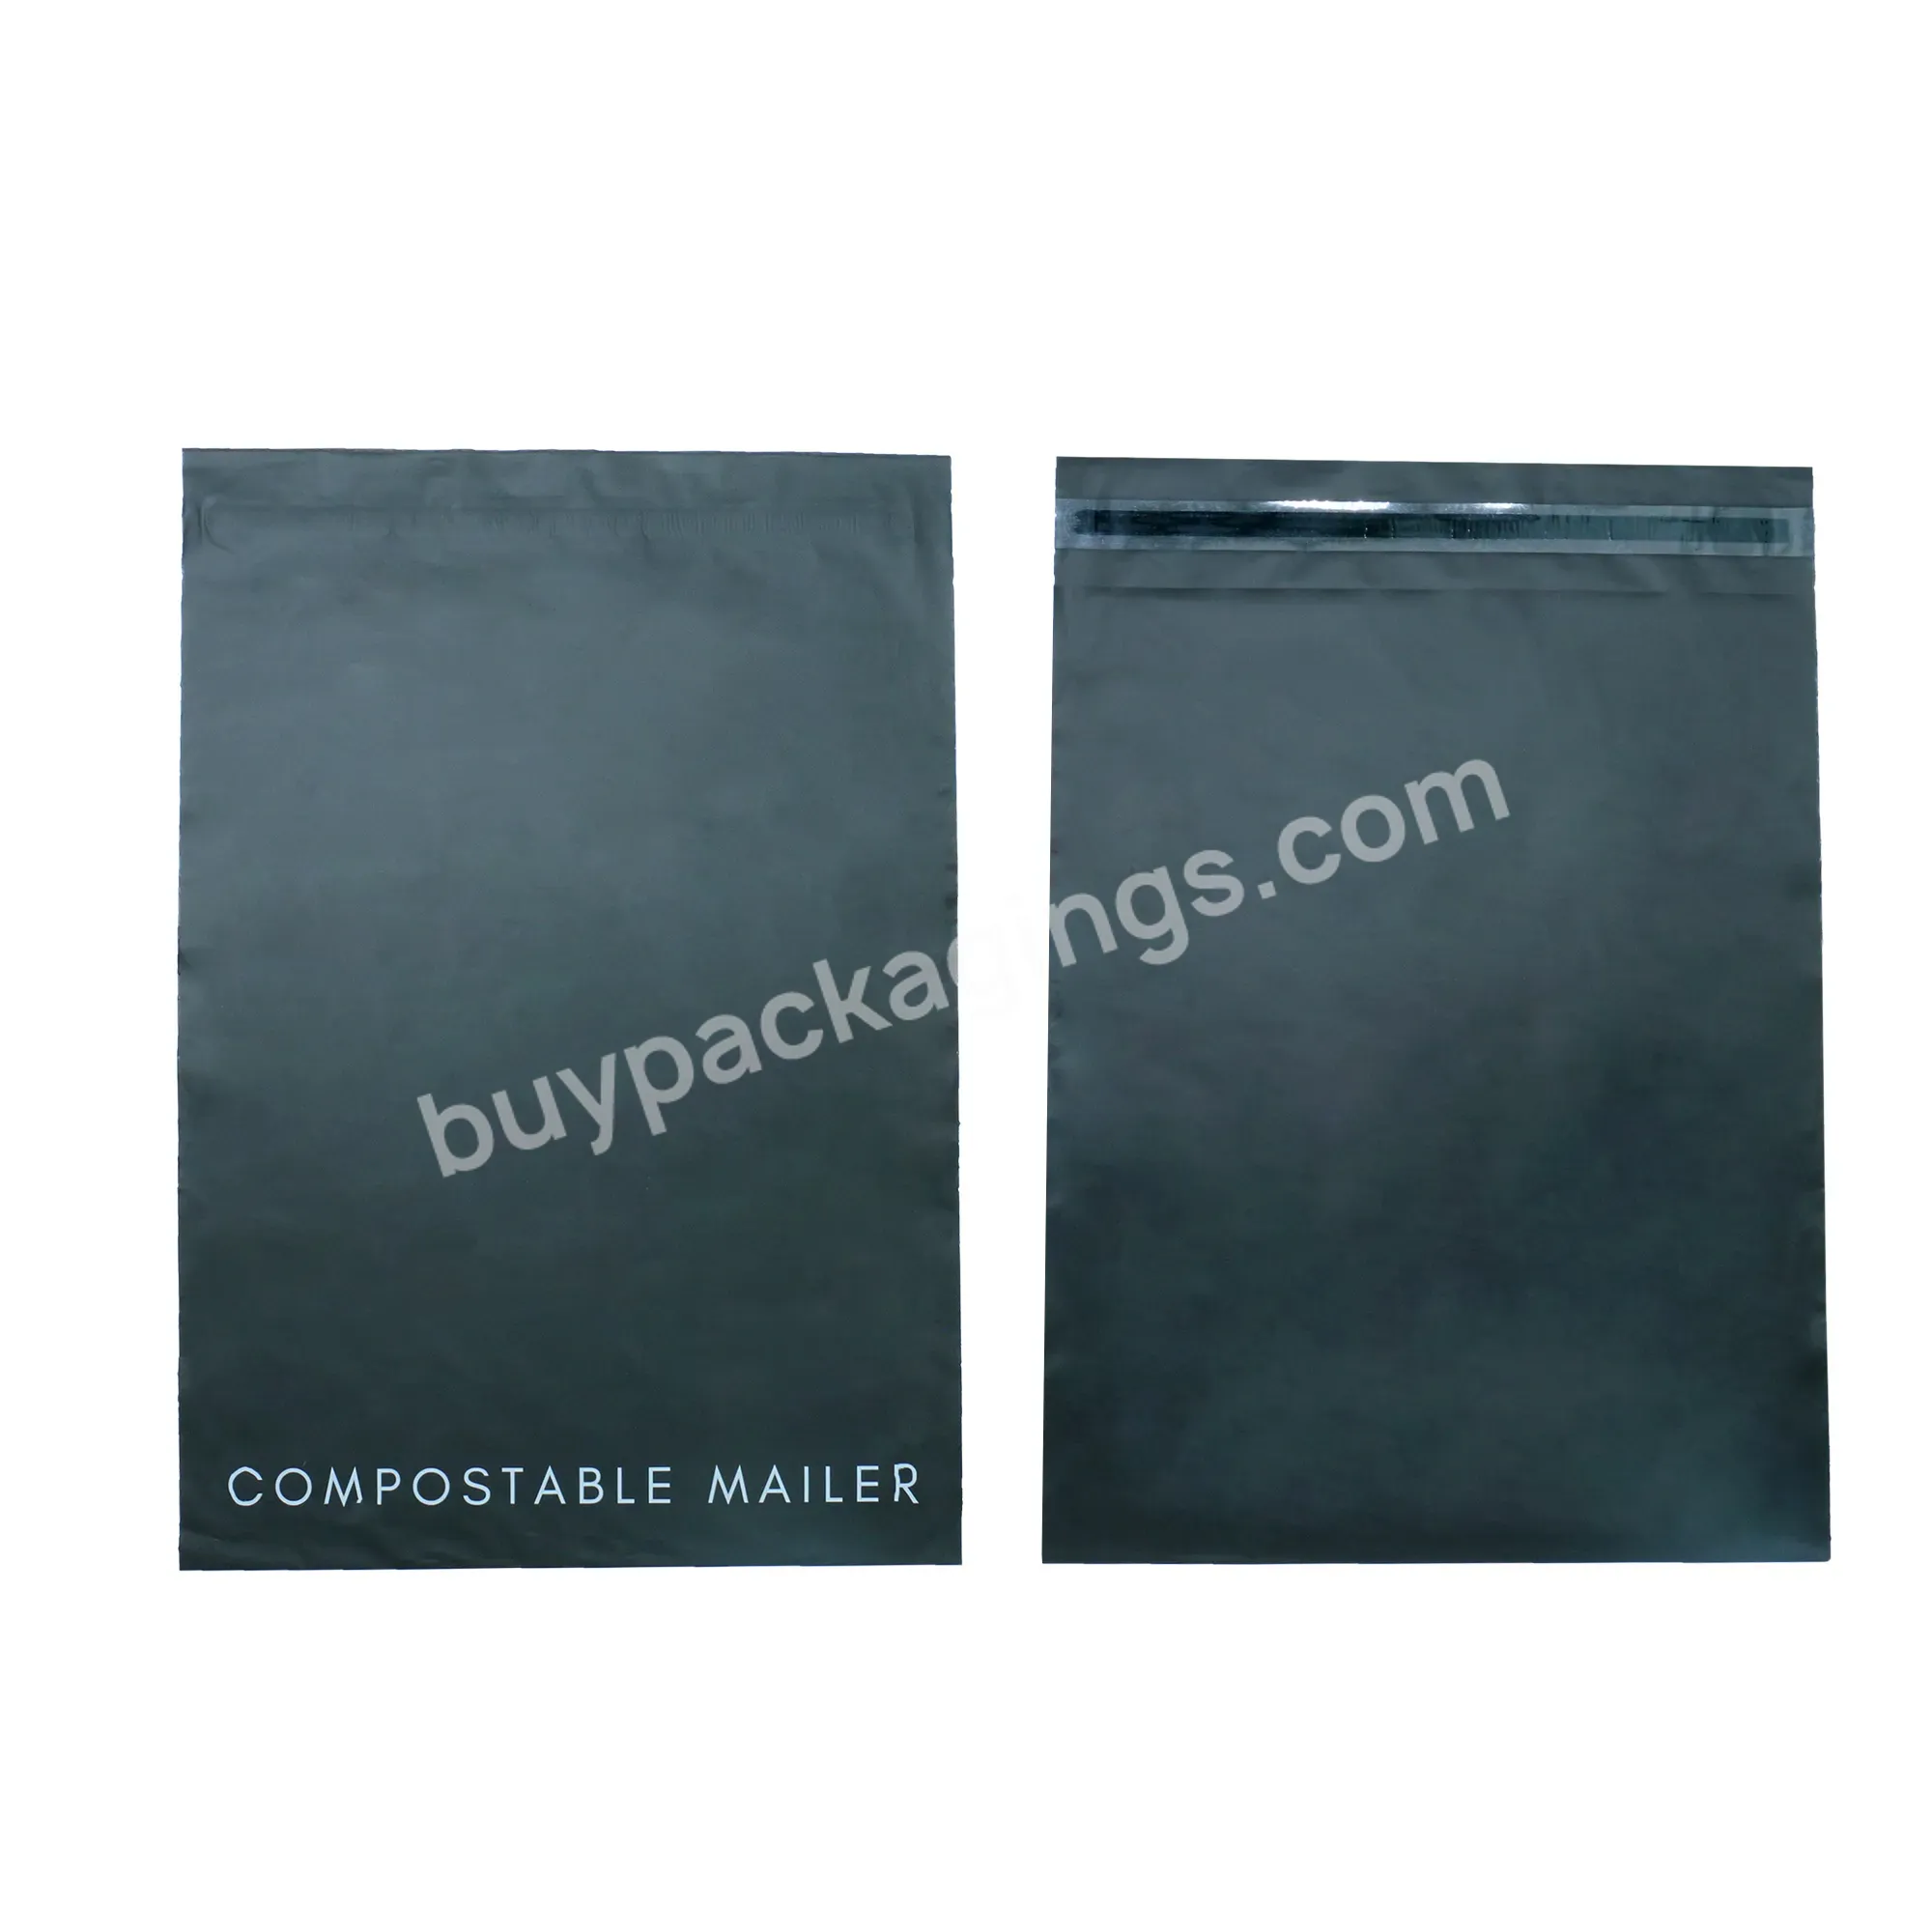 China Supplier Wholesale Biodegradable Compostable Pla Constarch Mailing Bag Polybag Courier Bag/post Bag - Buy Cornstarch Mailing Bag,Courier Bag Biodegradable,Courier Polybag.